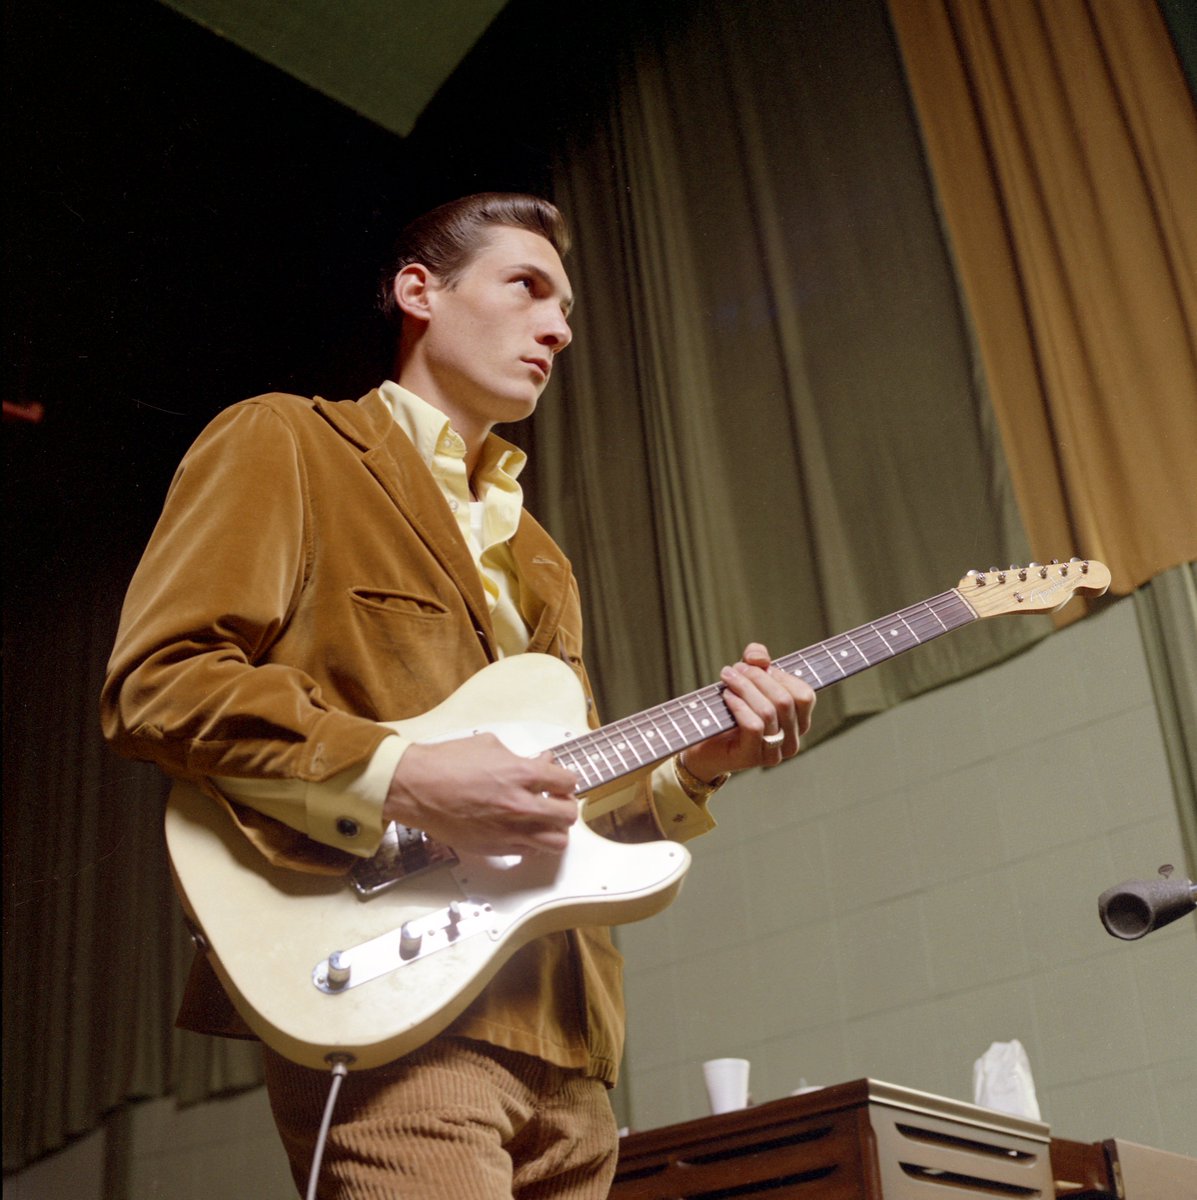 Happy Birthday, Steve Cropper! 🎸🎉 As one of the founding members of Booker T & The MGs, Mr. Cropper shaped the sound of Stax with his legendary guitar stylings. Share your birthday wishes for him below. 👇

📸: Bill Carrier Jr., Courtesy of Concord #stevecropper